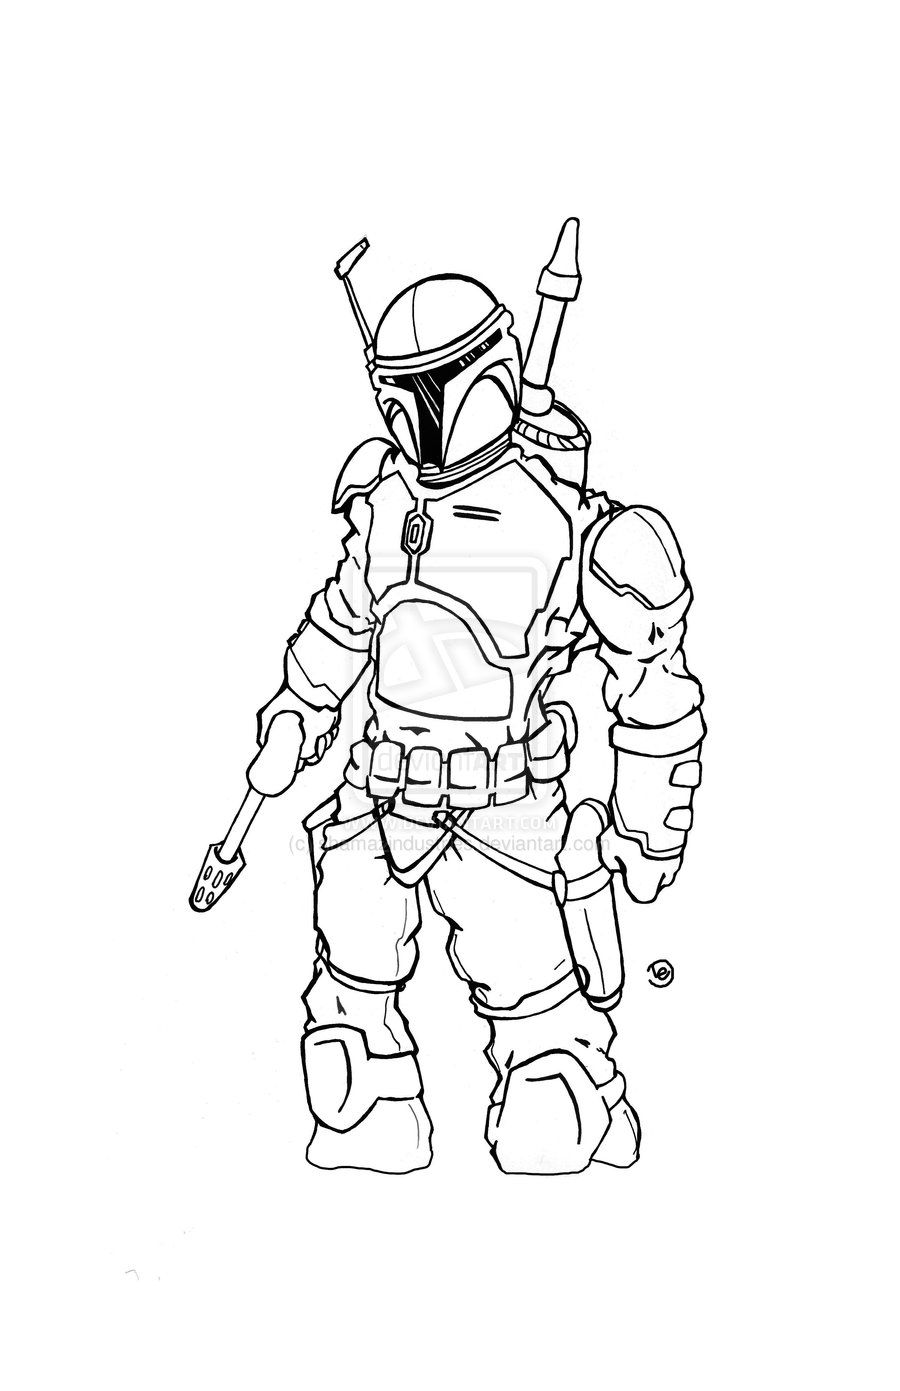 Boba Fett Helmet Coloring Pages   Coloring Home